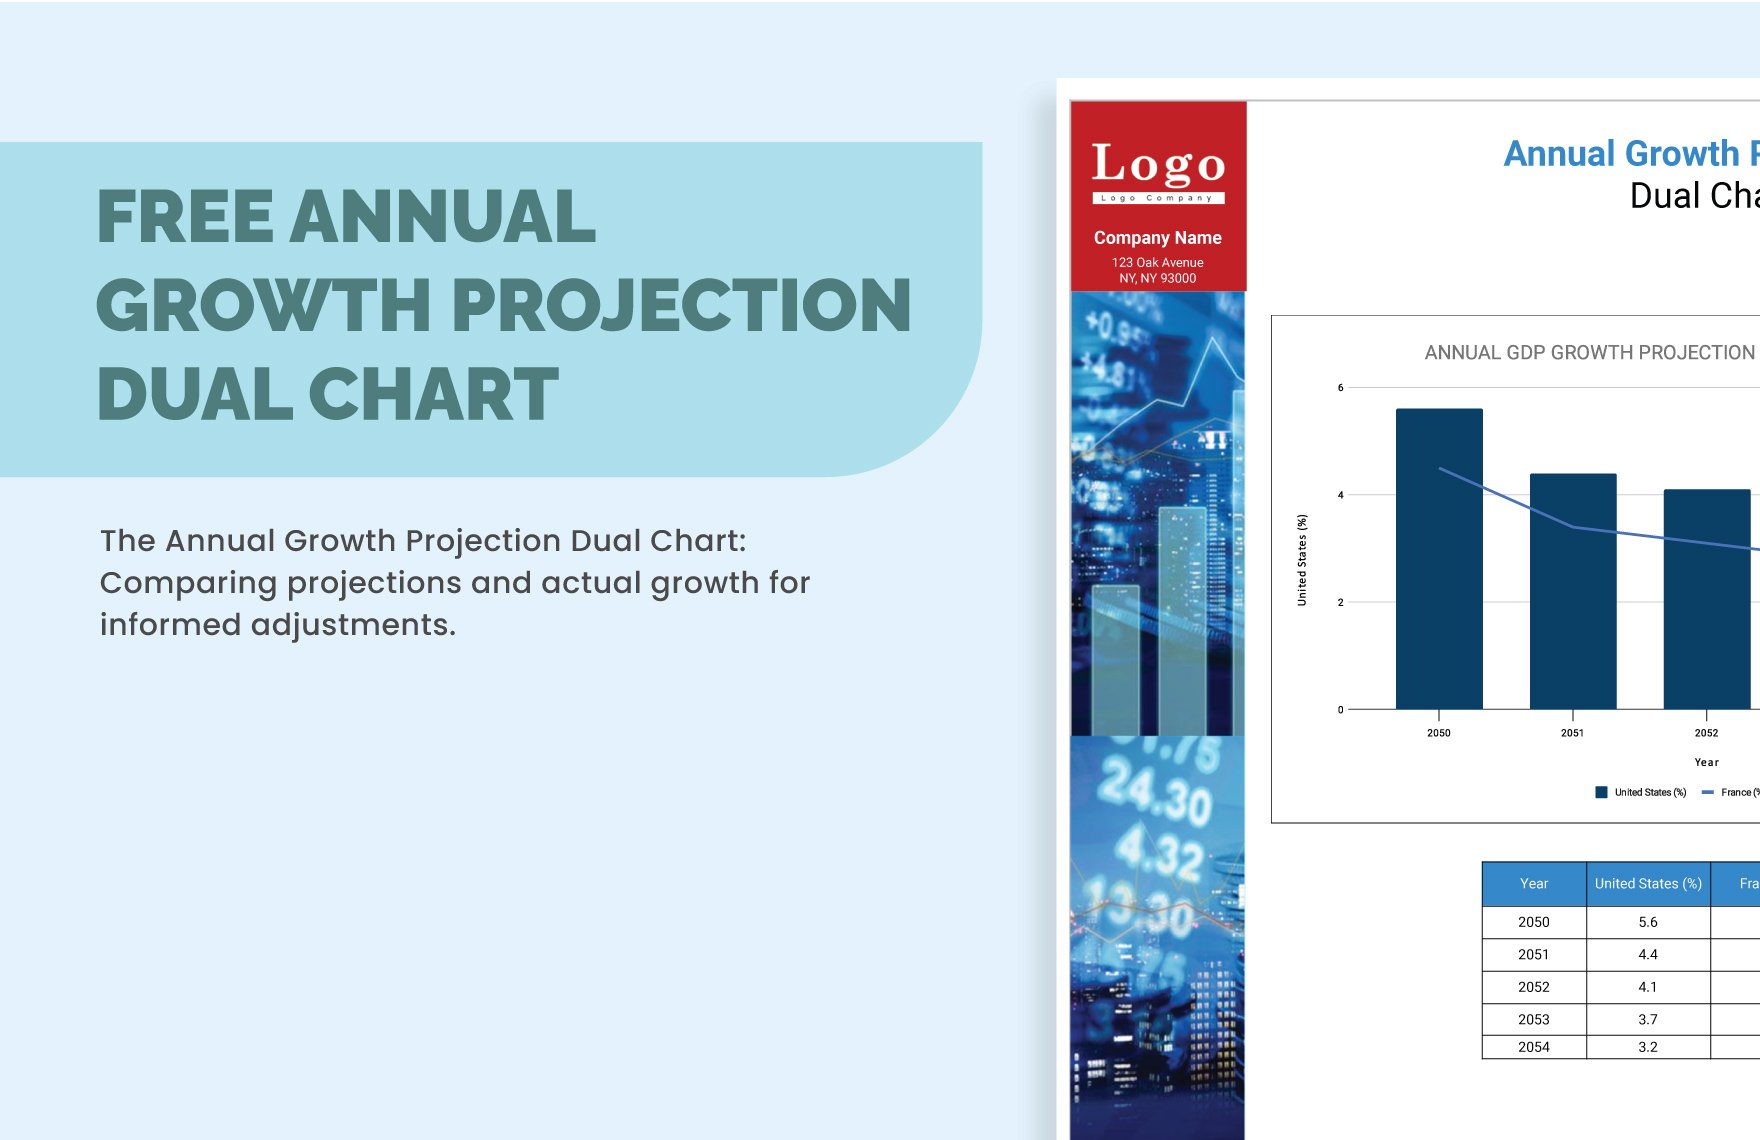 Free Annual Growth Projection Dual Chart